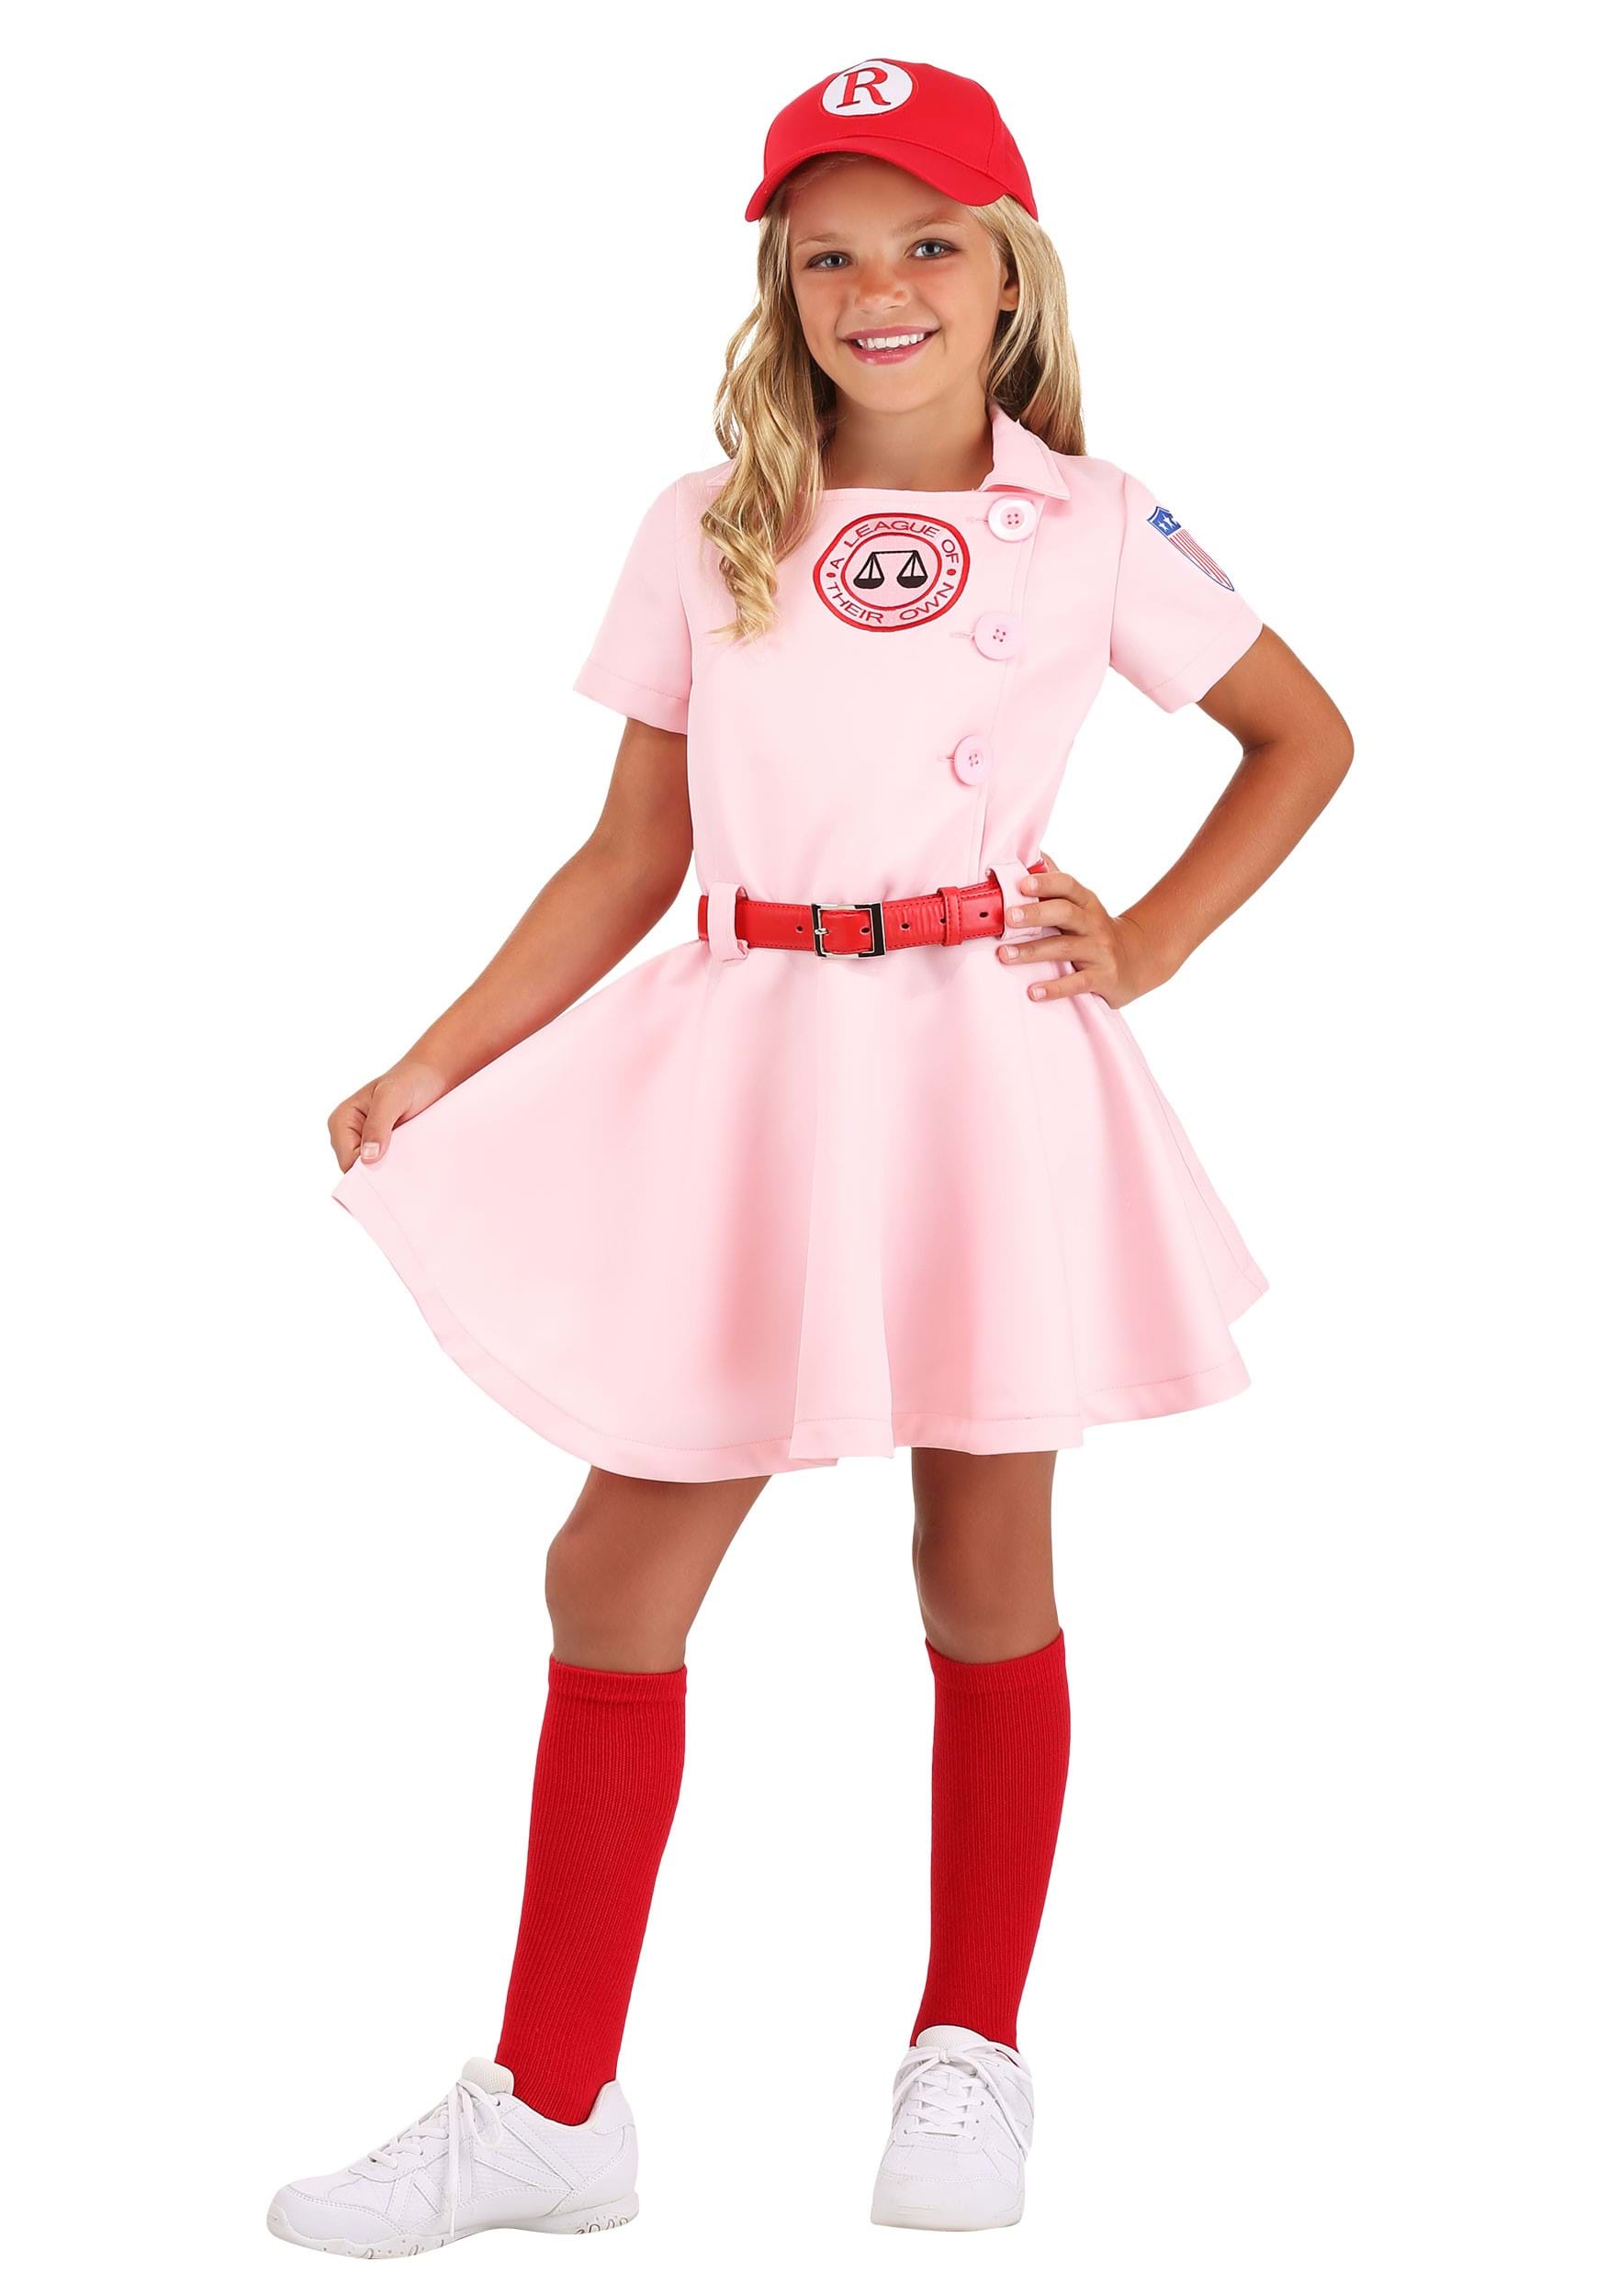 League of Their Own Luxury Child Dottie Costume for Girls